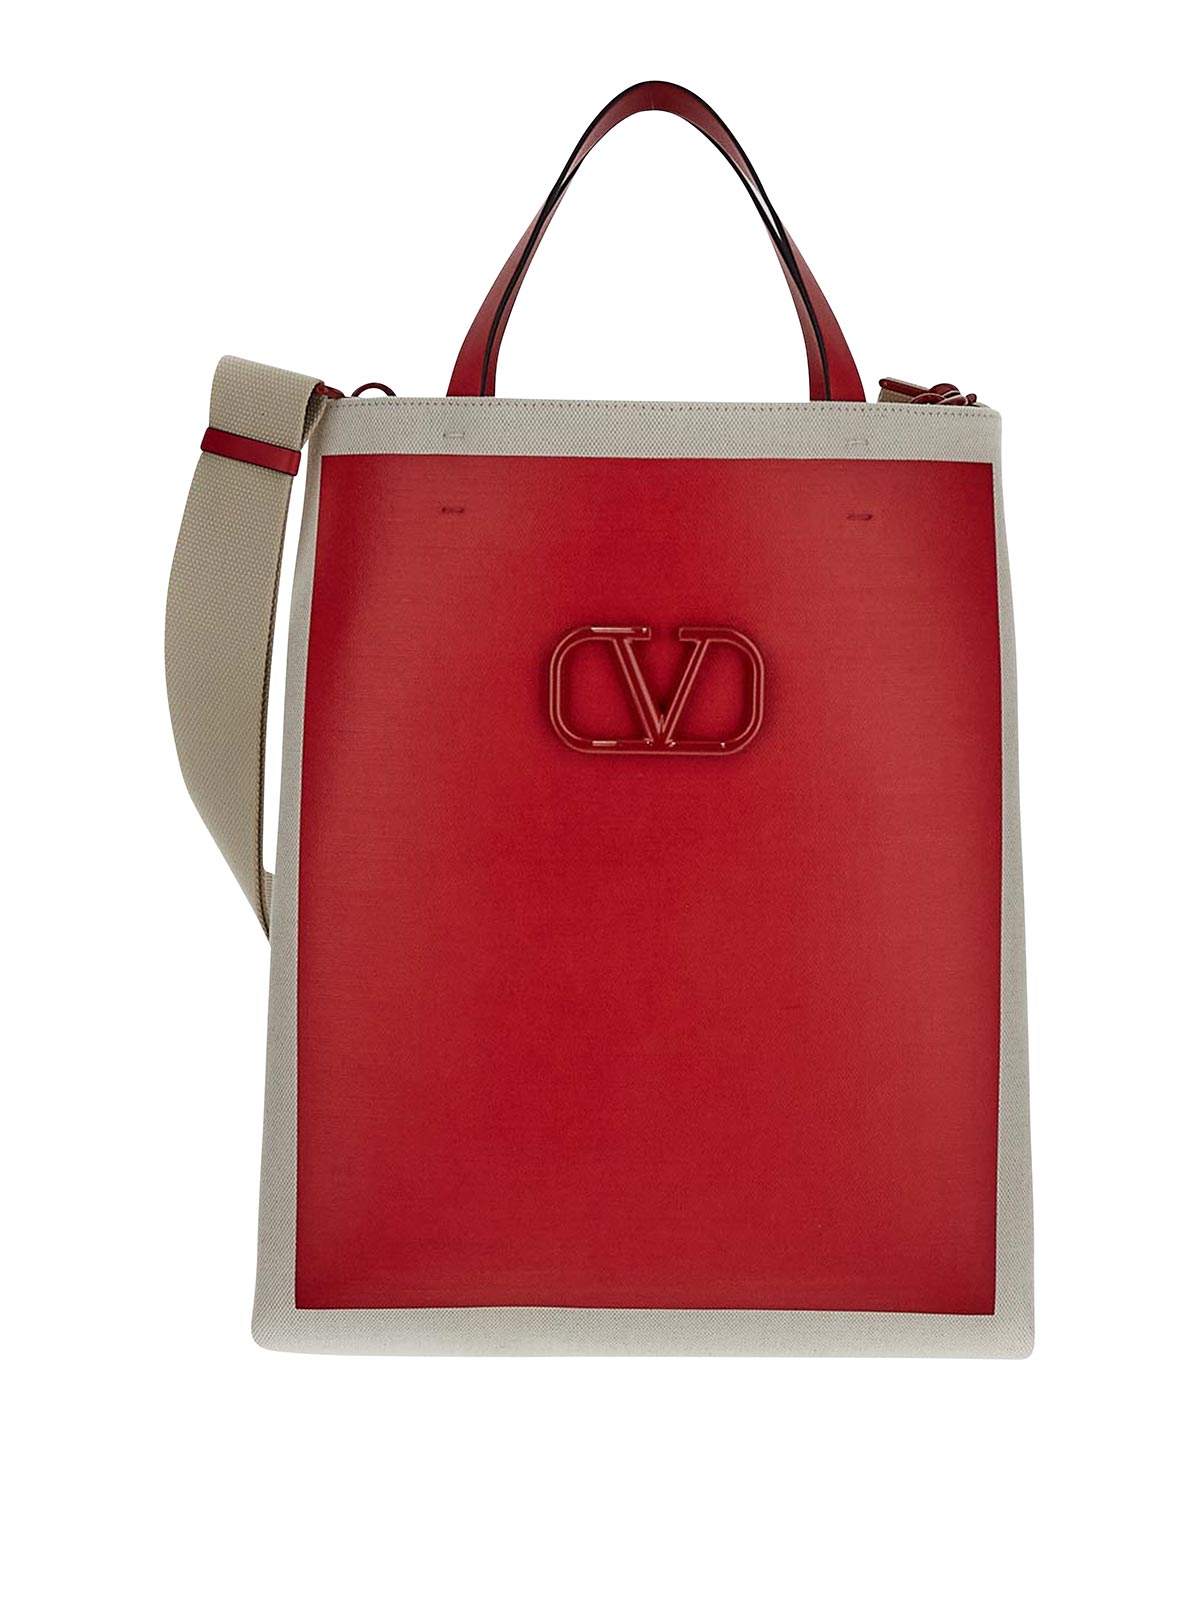 Valentino Garavani Shopping Bag In Natural With Red Panel Print